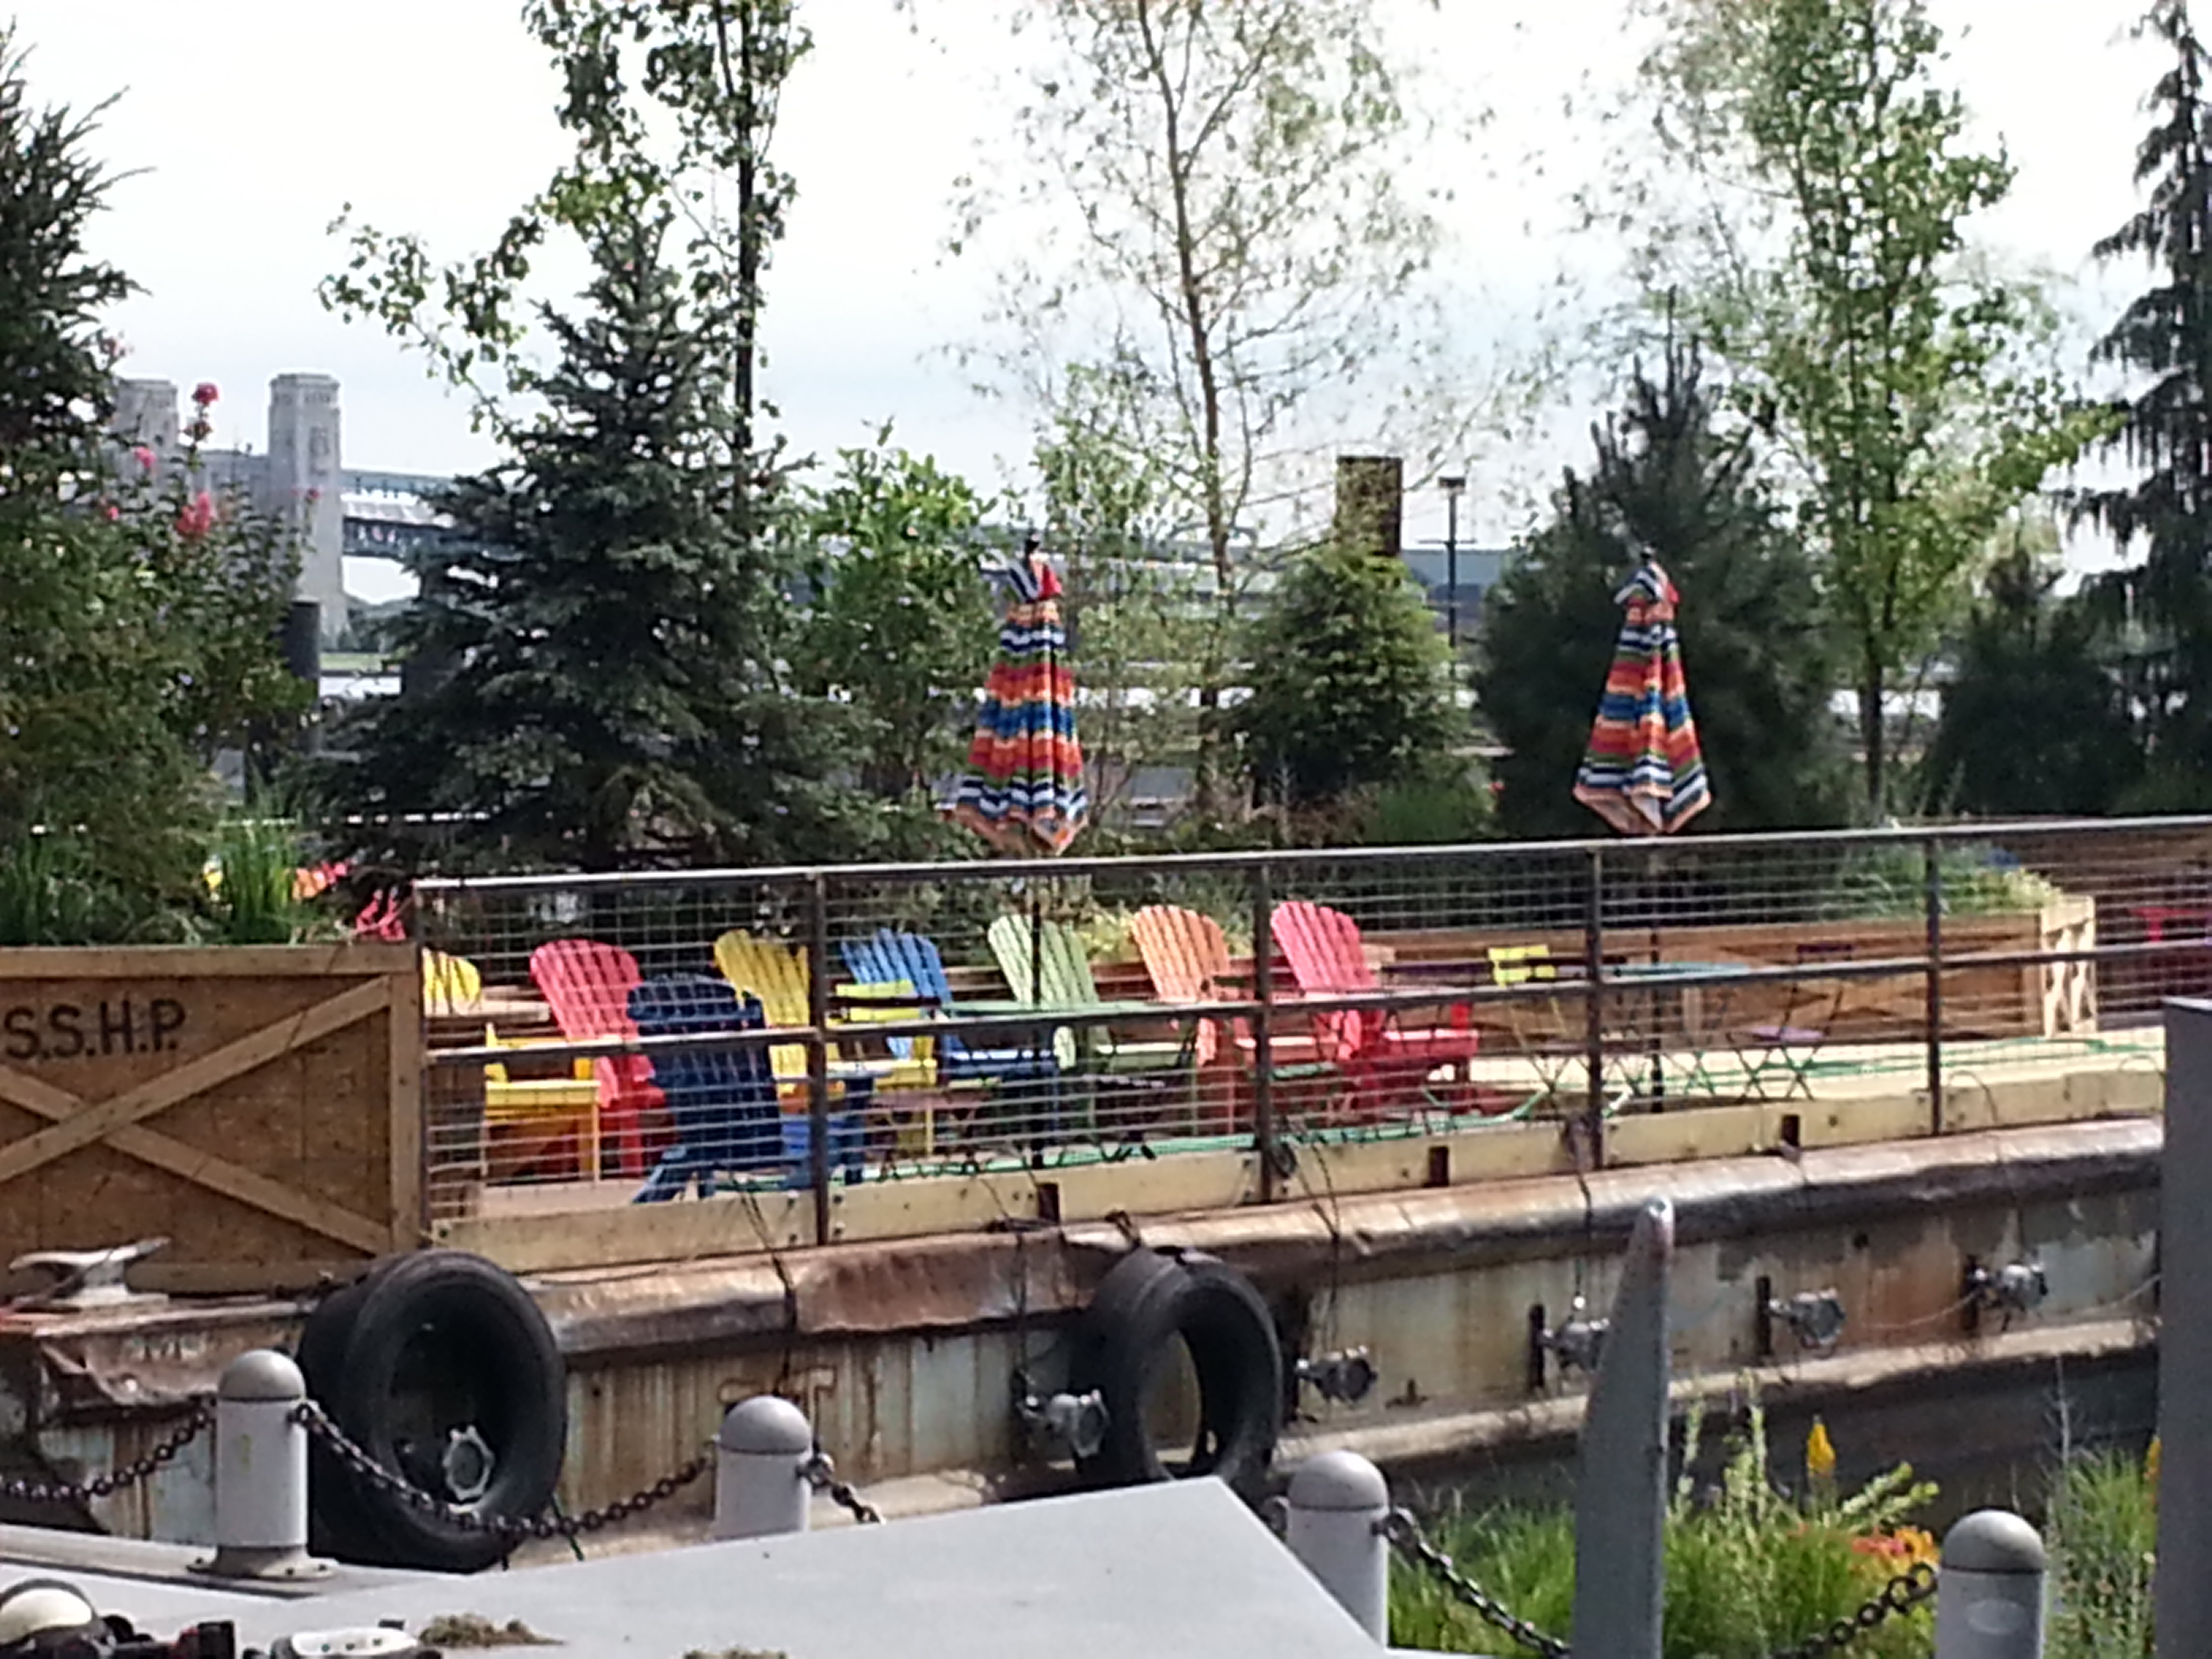 Colorful chairs lined up on one of the three Spruce Street Harbor Park barges